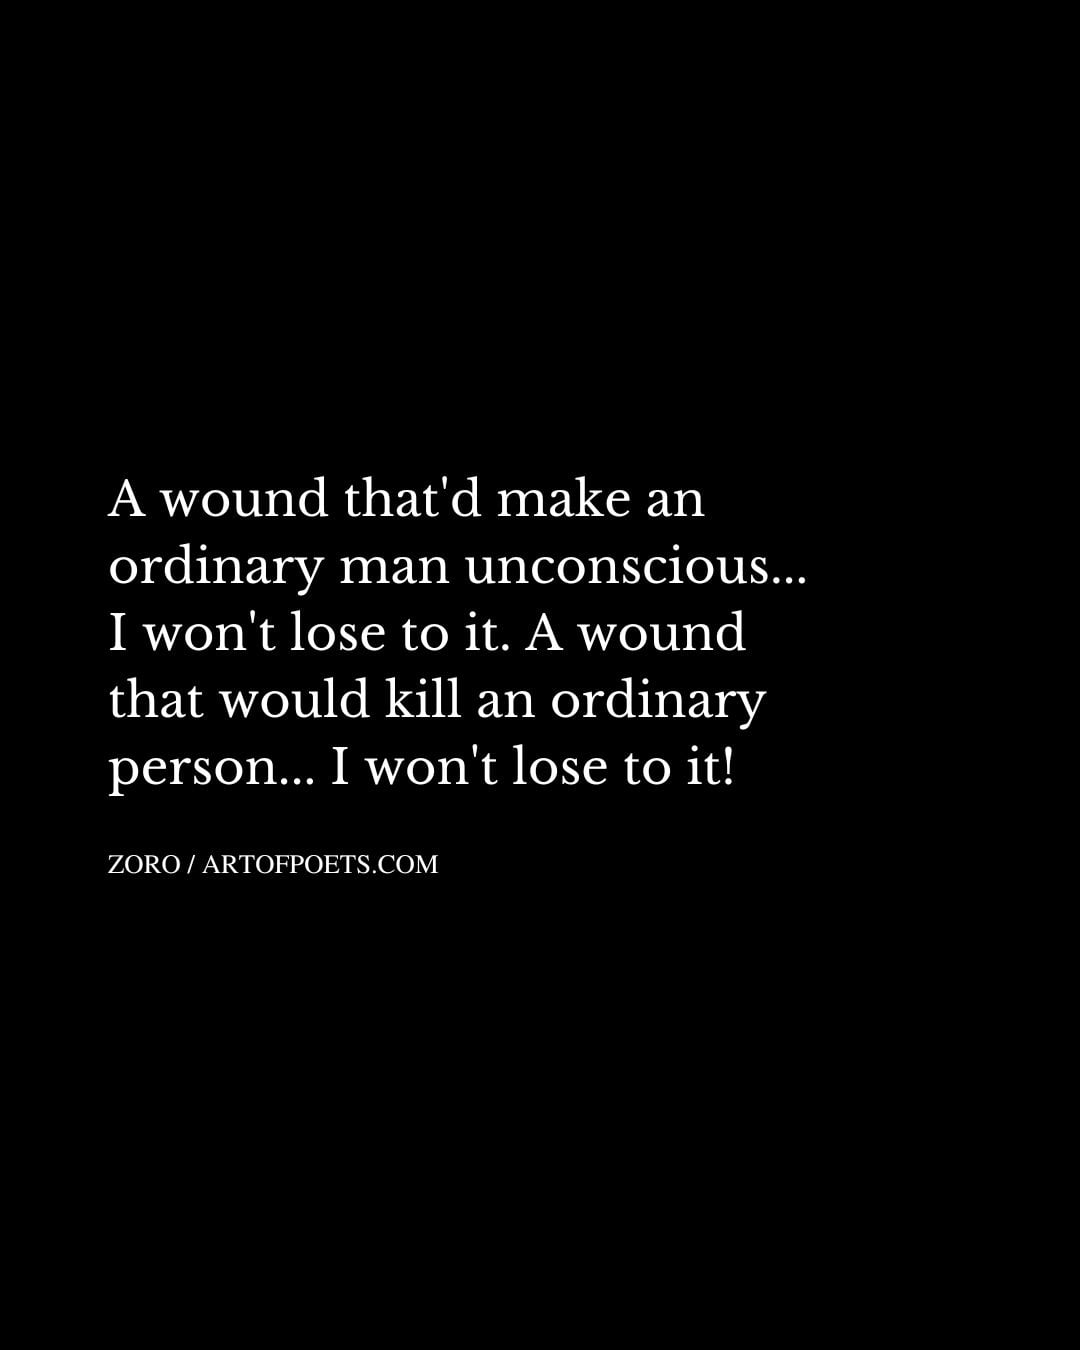 A wound thatd make an ordinary man unconscious. I wont lose to it